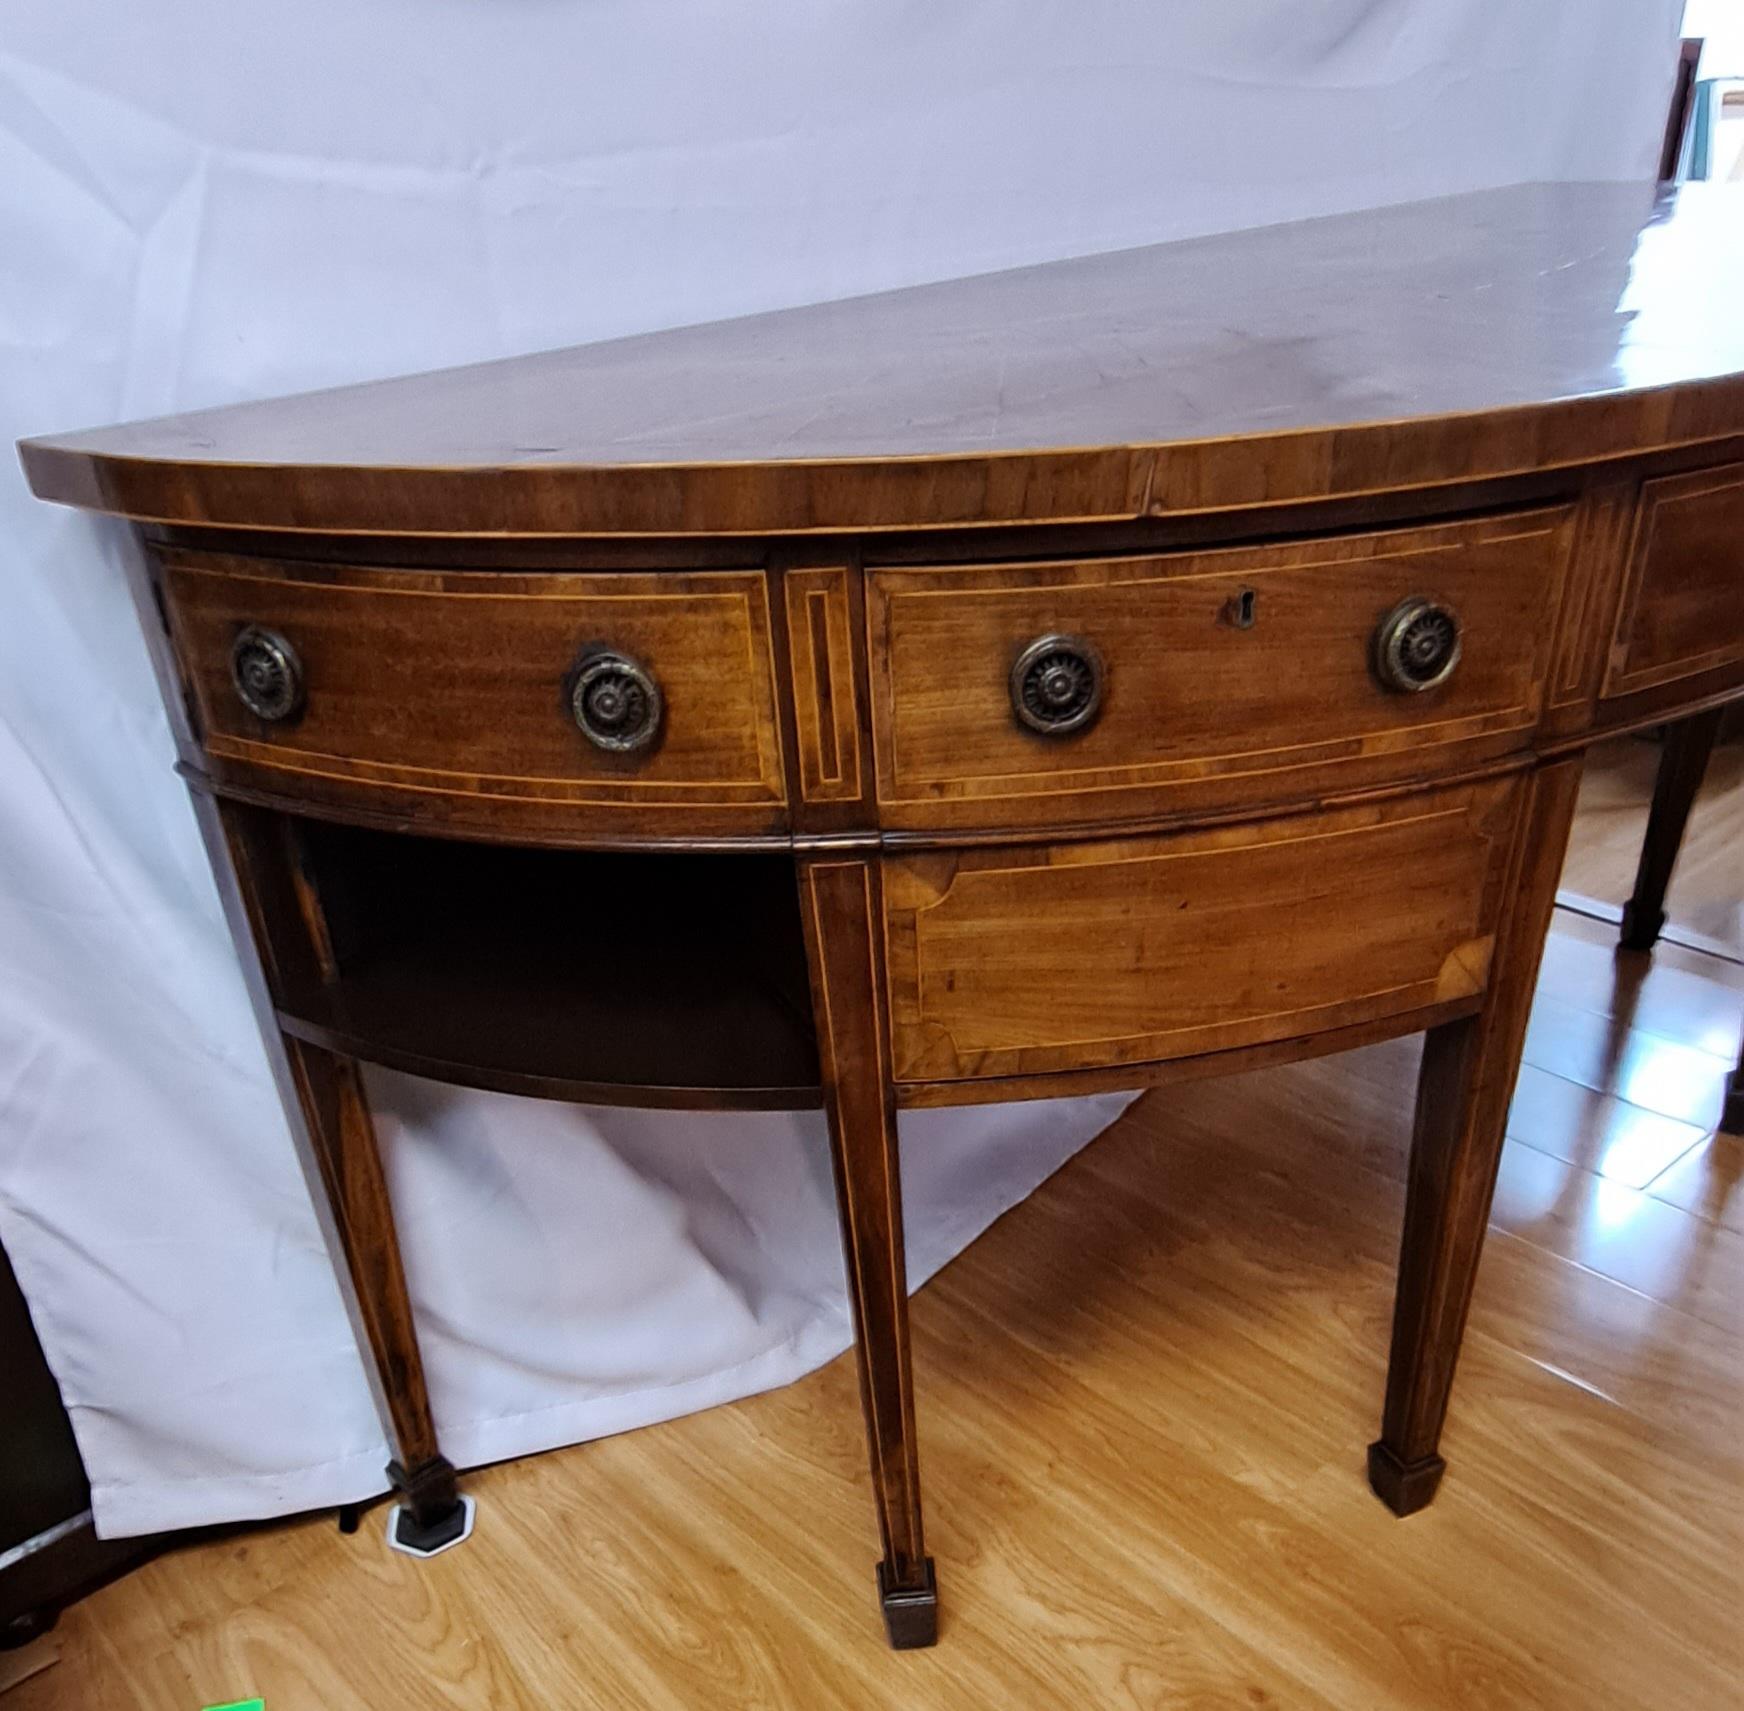 19th Century Federal Sideboard With Inlay

78